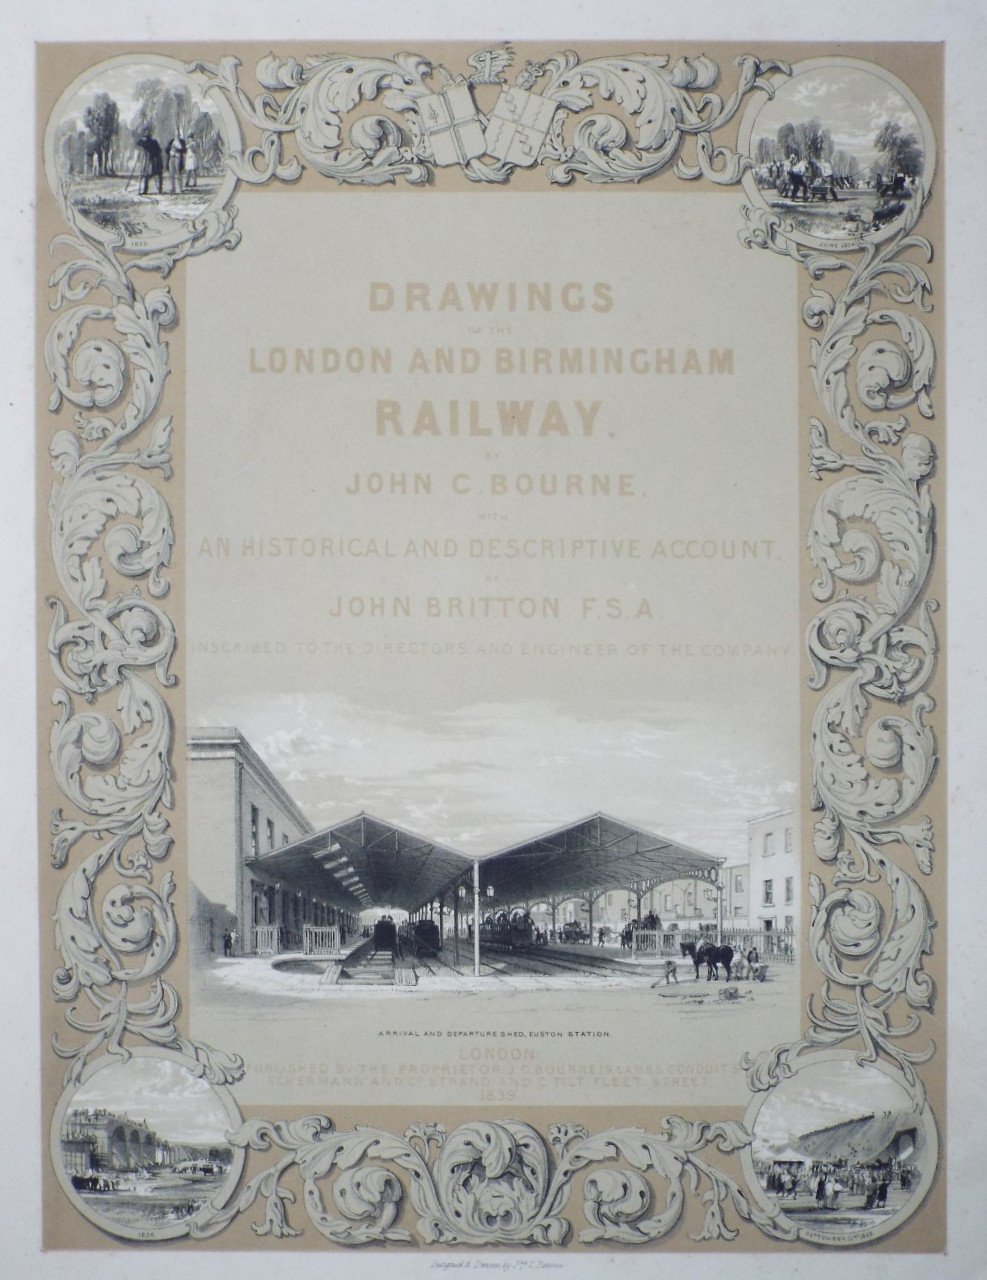 Print - (Title page) Arrival and Departure Shed, Euston Station. - Bourne